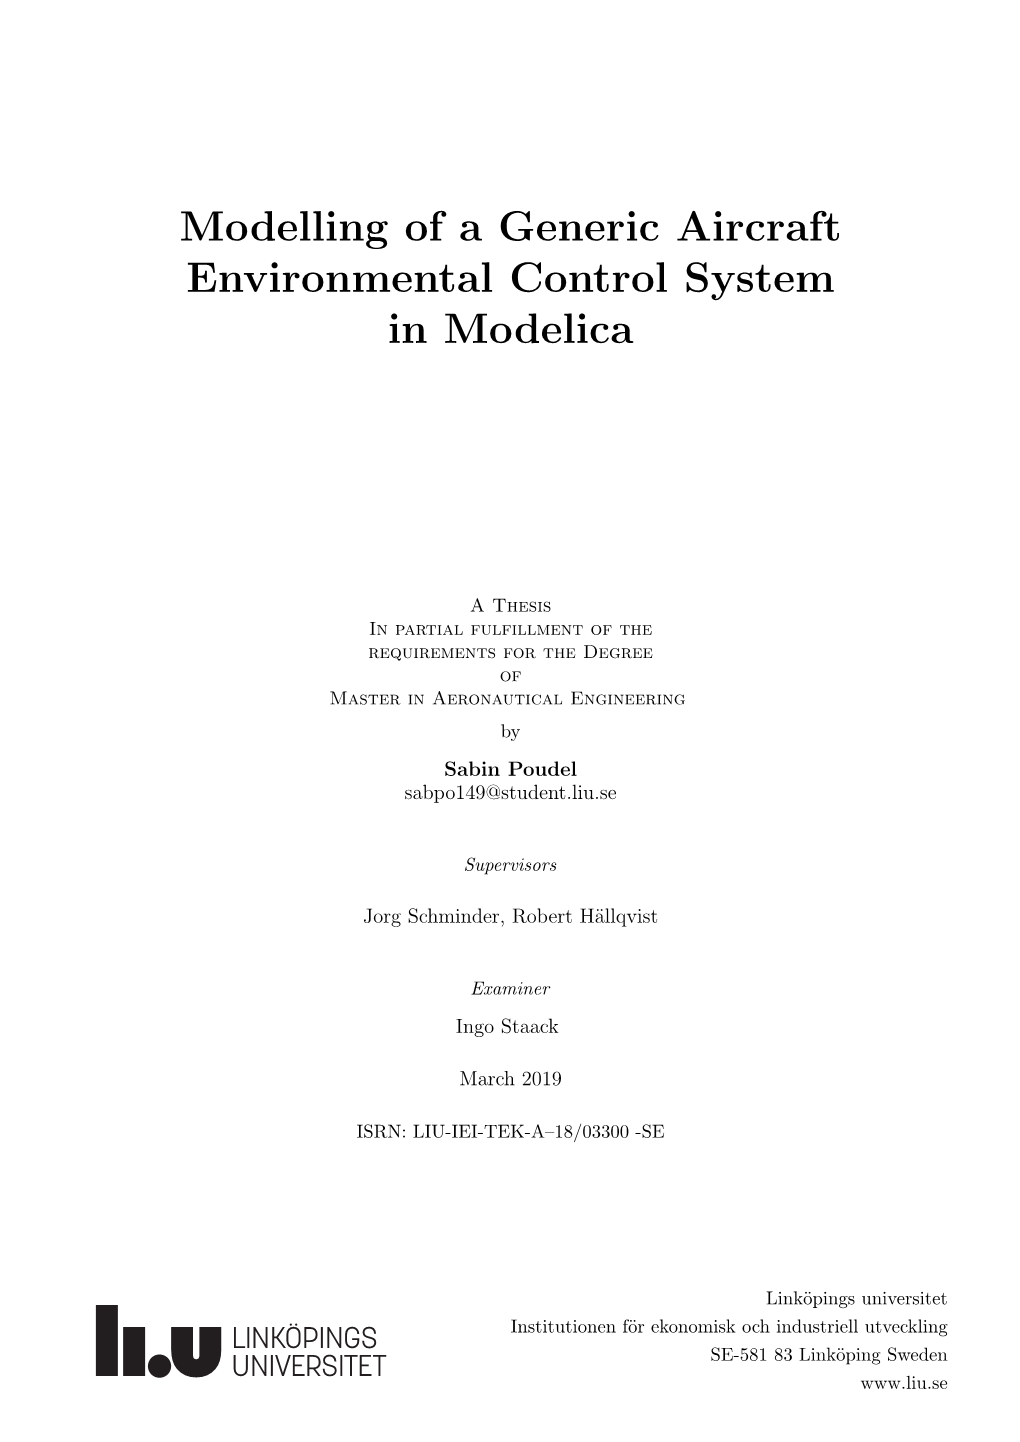 Modelling of a Generic Aircraft Environmental Control System in Modelica